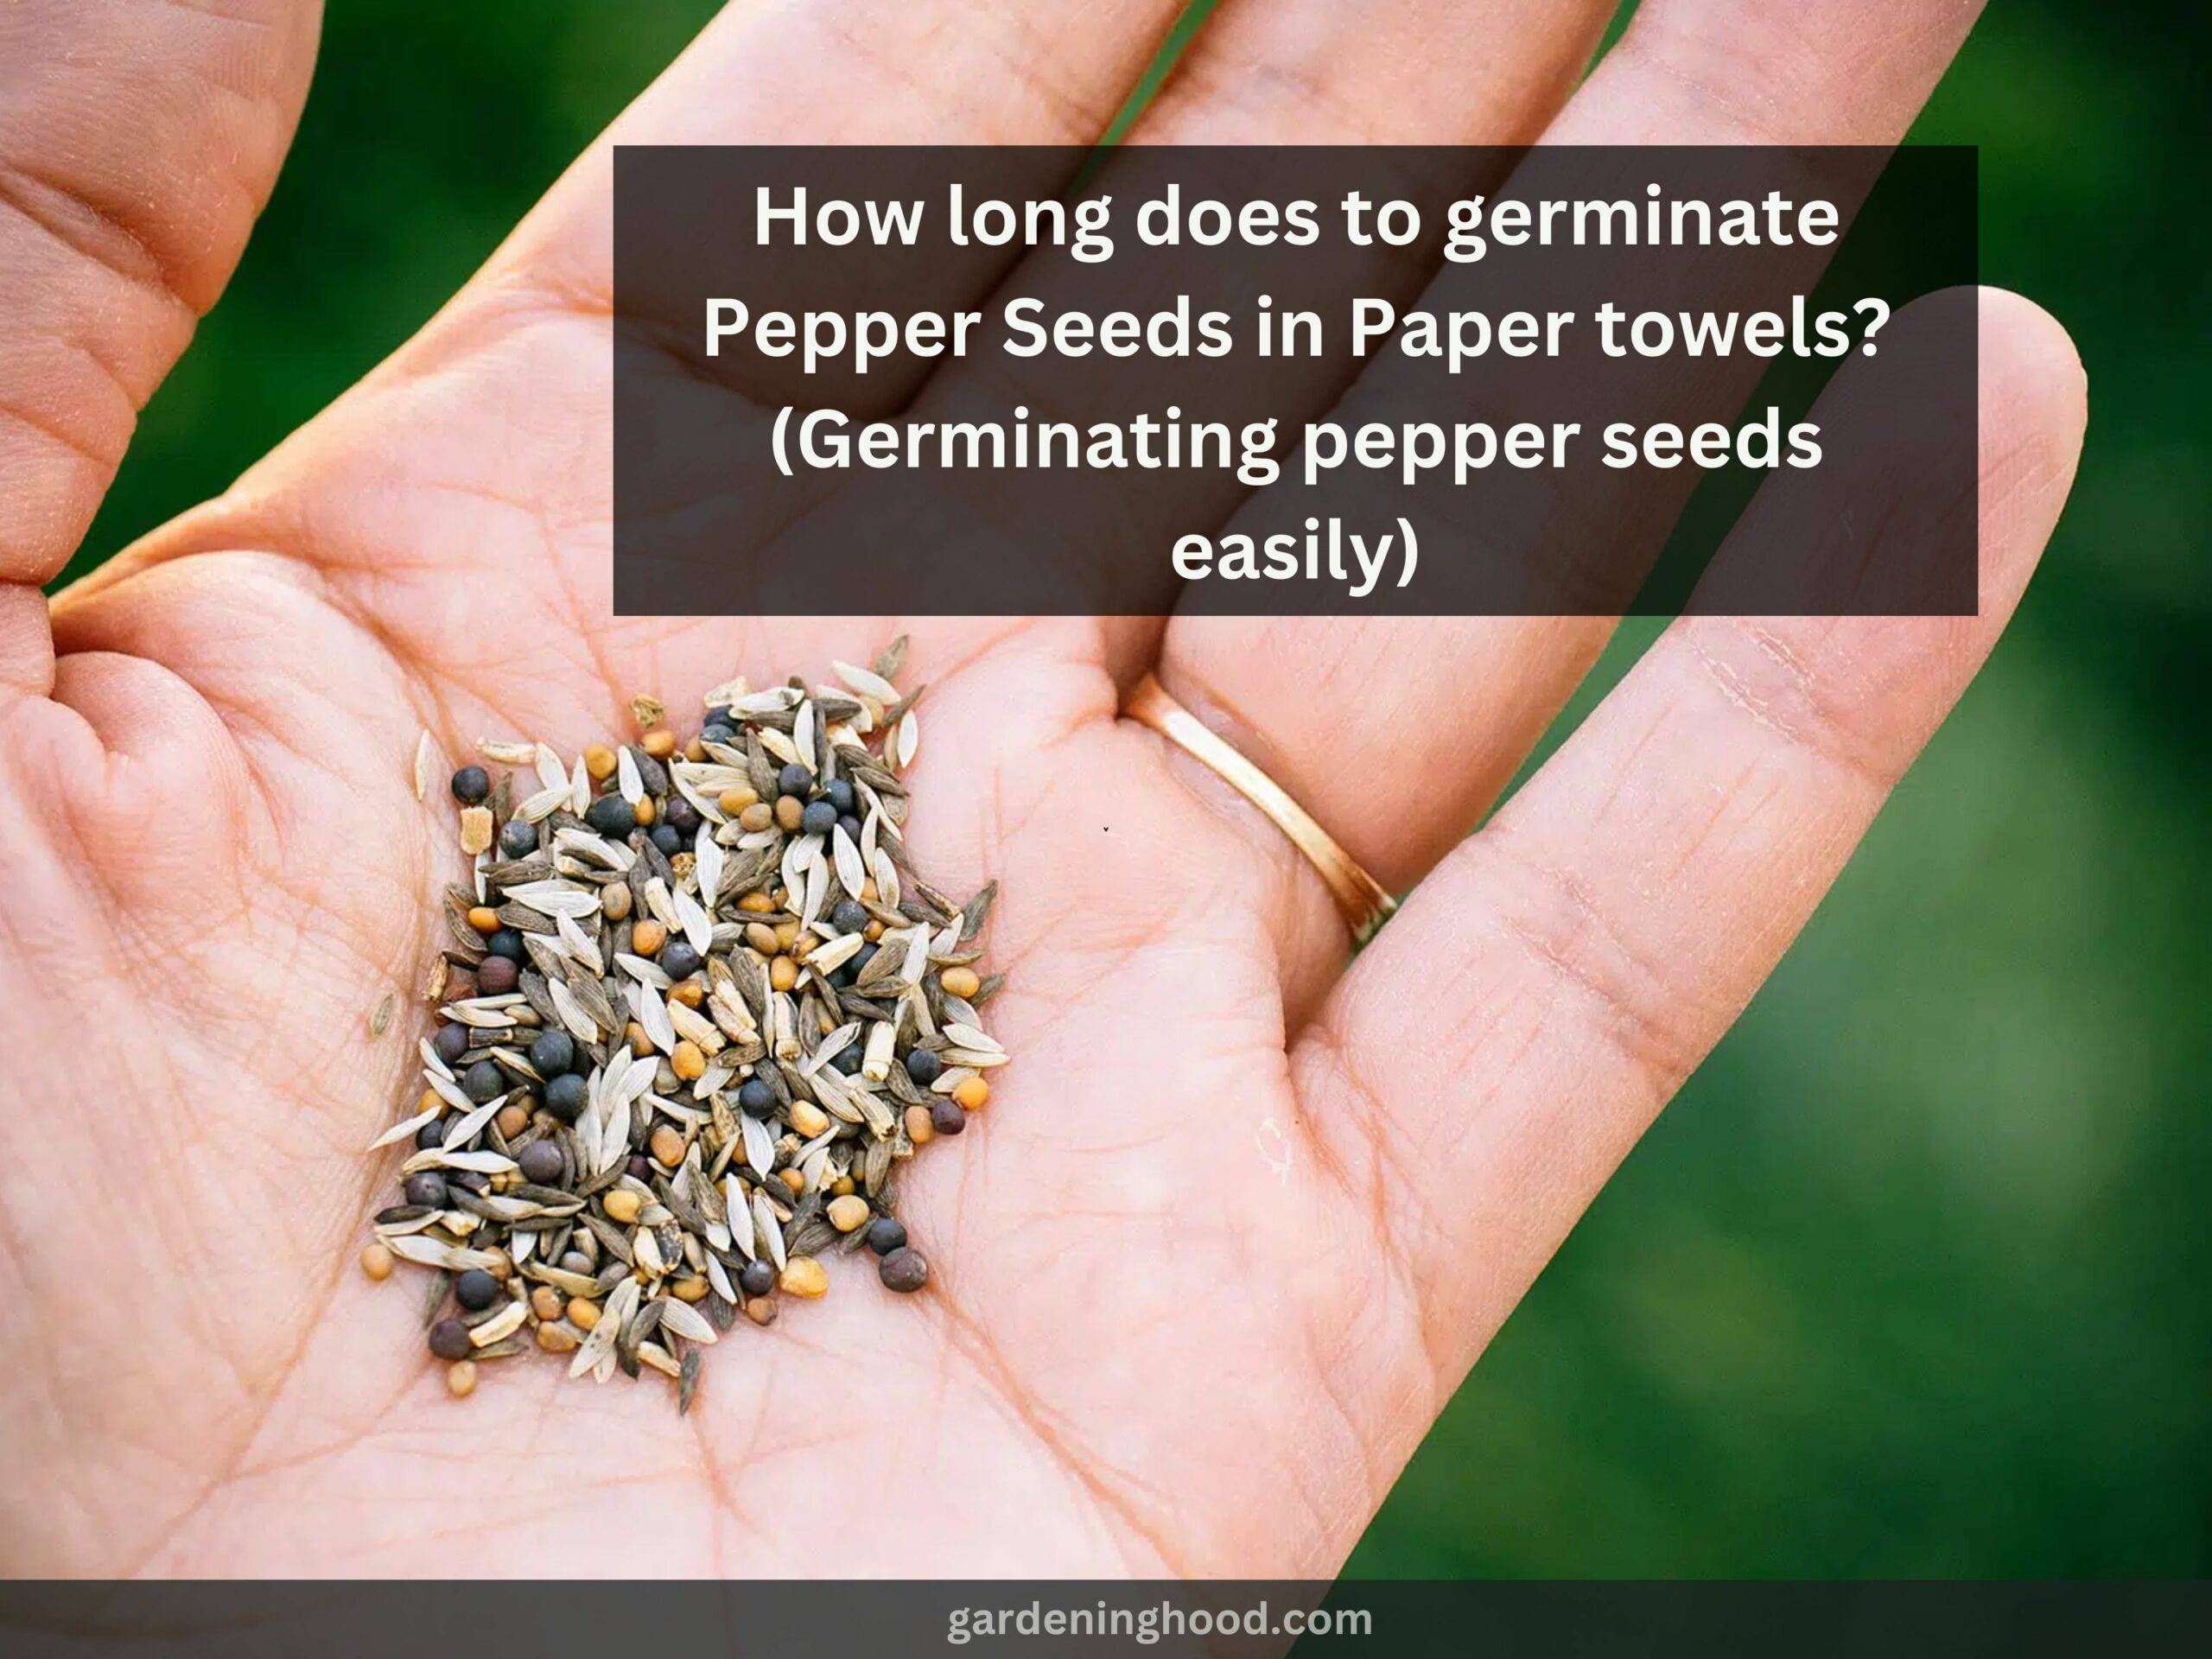 How long does to germinate Pepper Seeds in Paper towels? (Germinating pepper seeds easily)